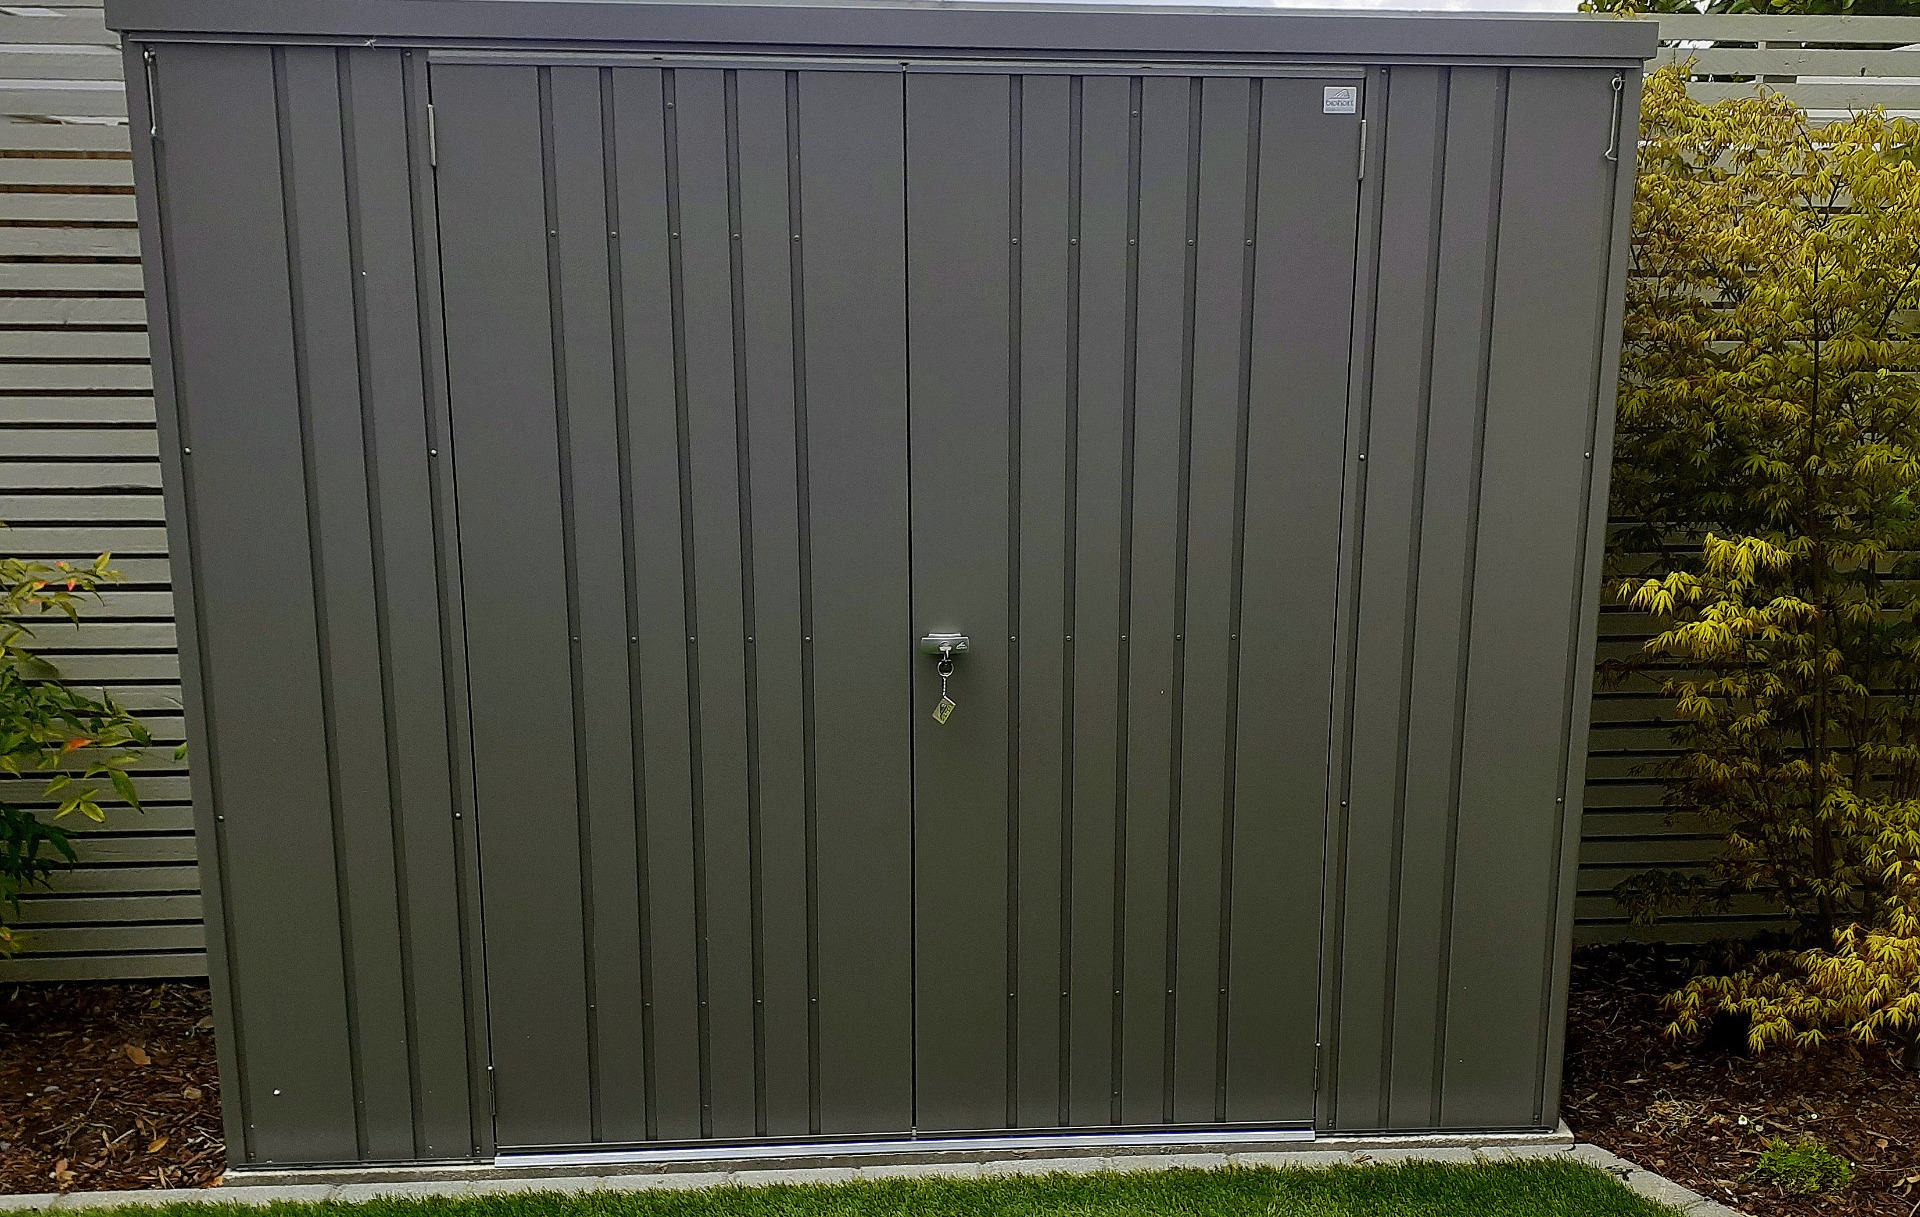 The superb quality and style of the Biohort Equipment Locker 230 in metallic quartz grey  | supplied + installed in Terenure by Owen Chubb Landscapers. Tel 087-2306 128.